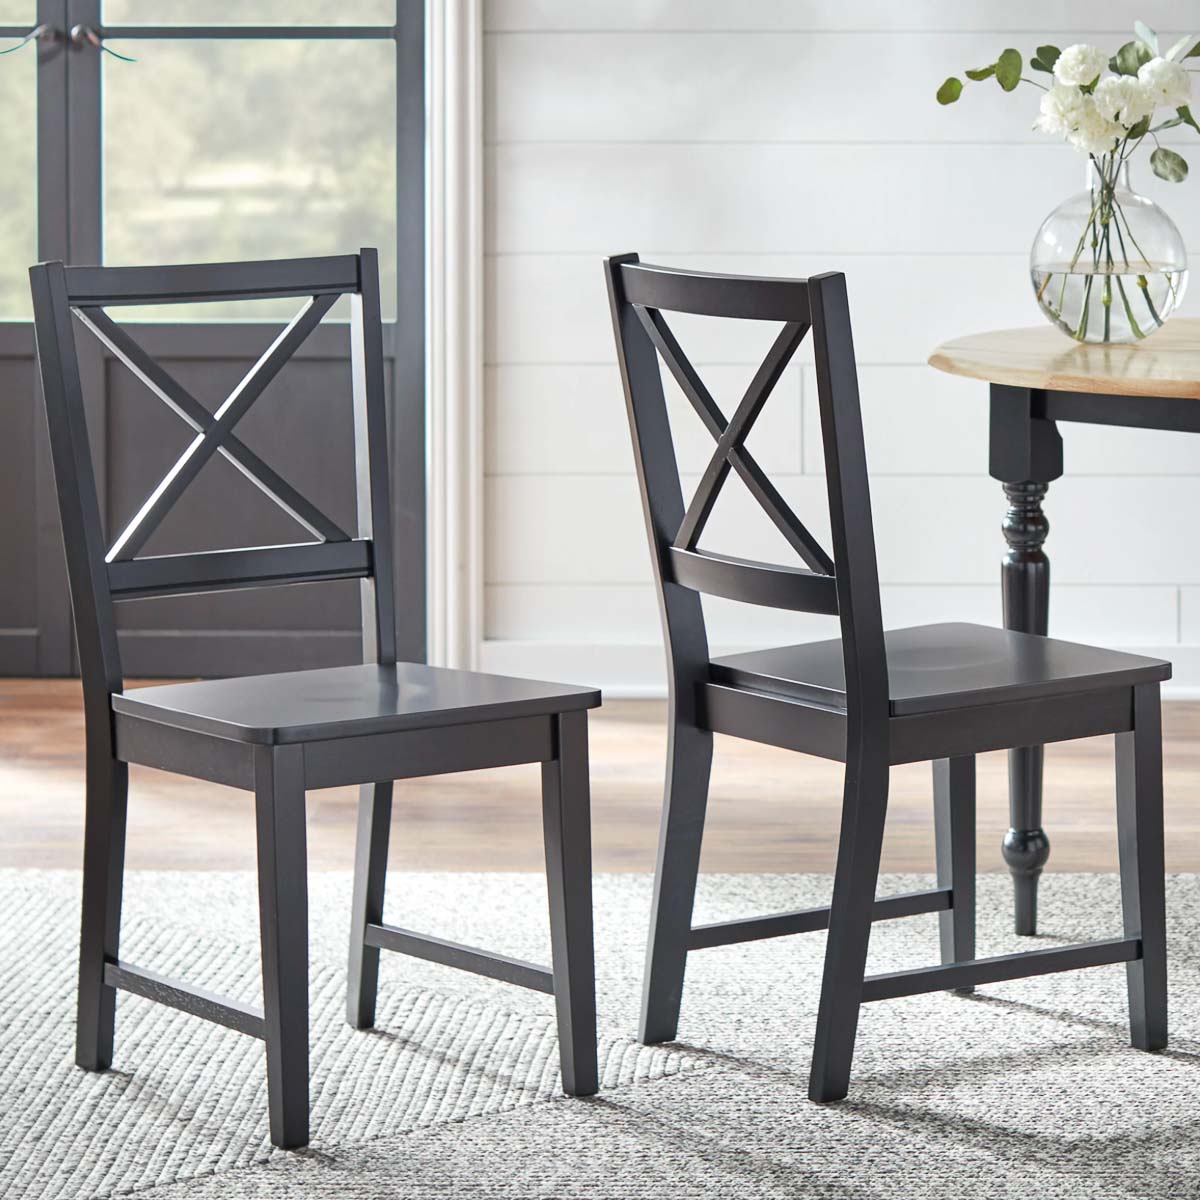 Classic cross back dining chair